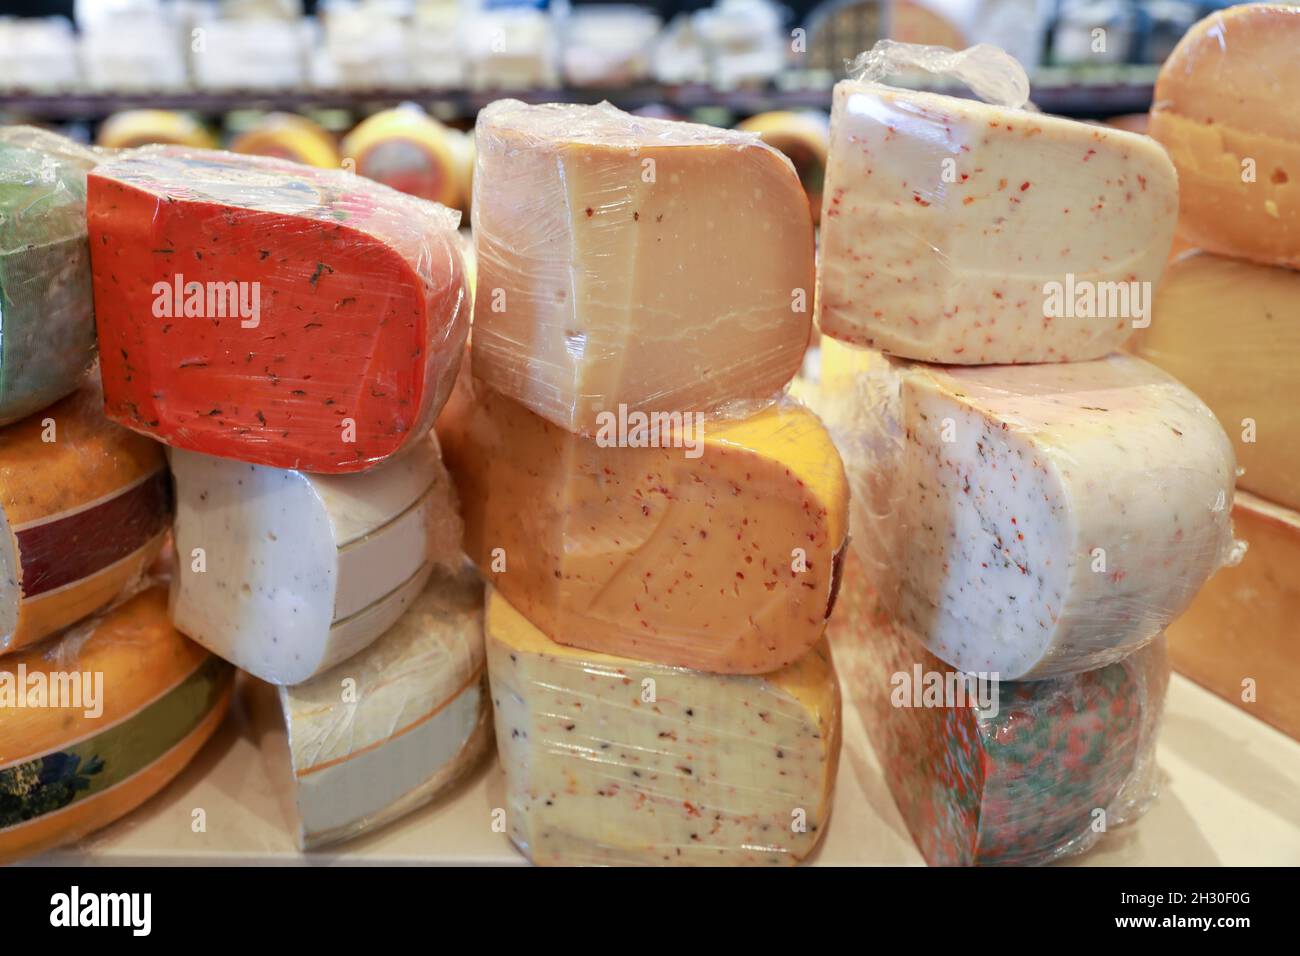 Several types of hard cheeses are for sale in a deli. Stock Photo